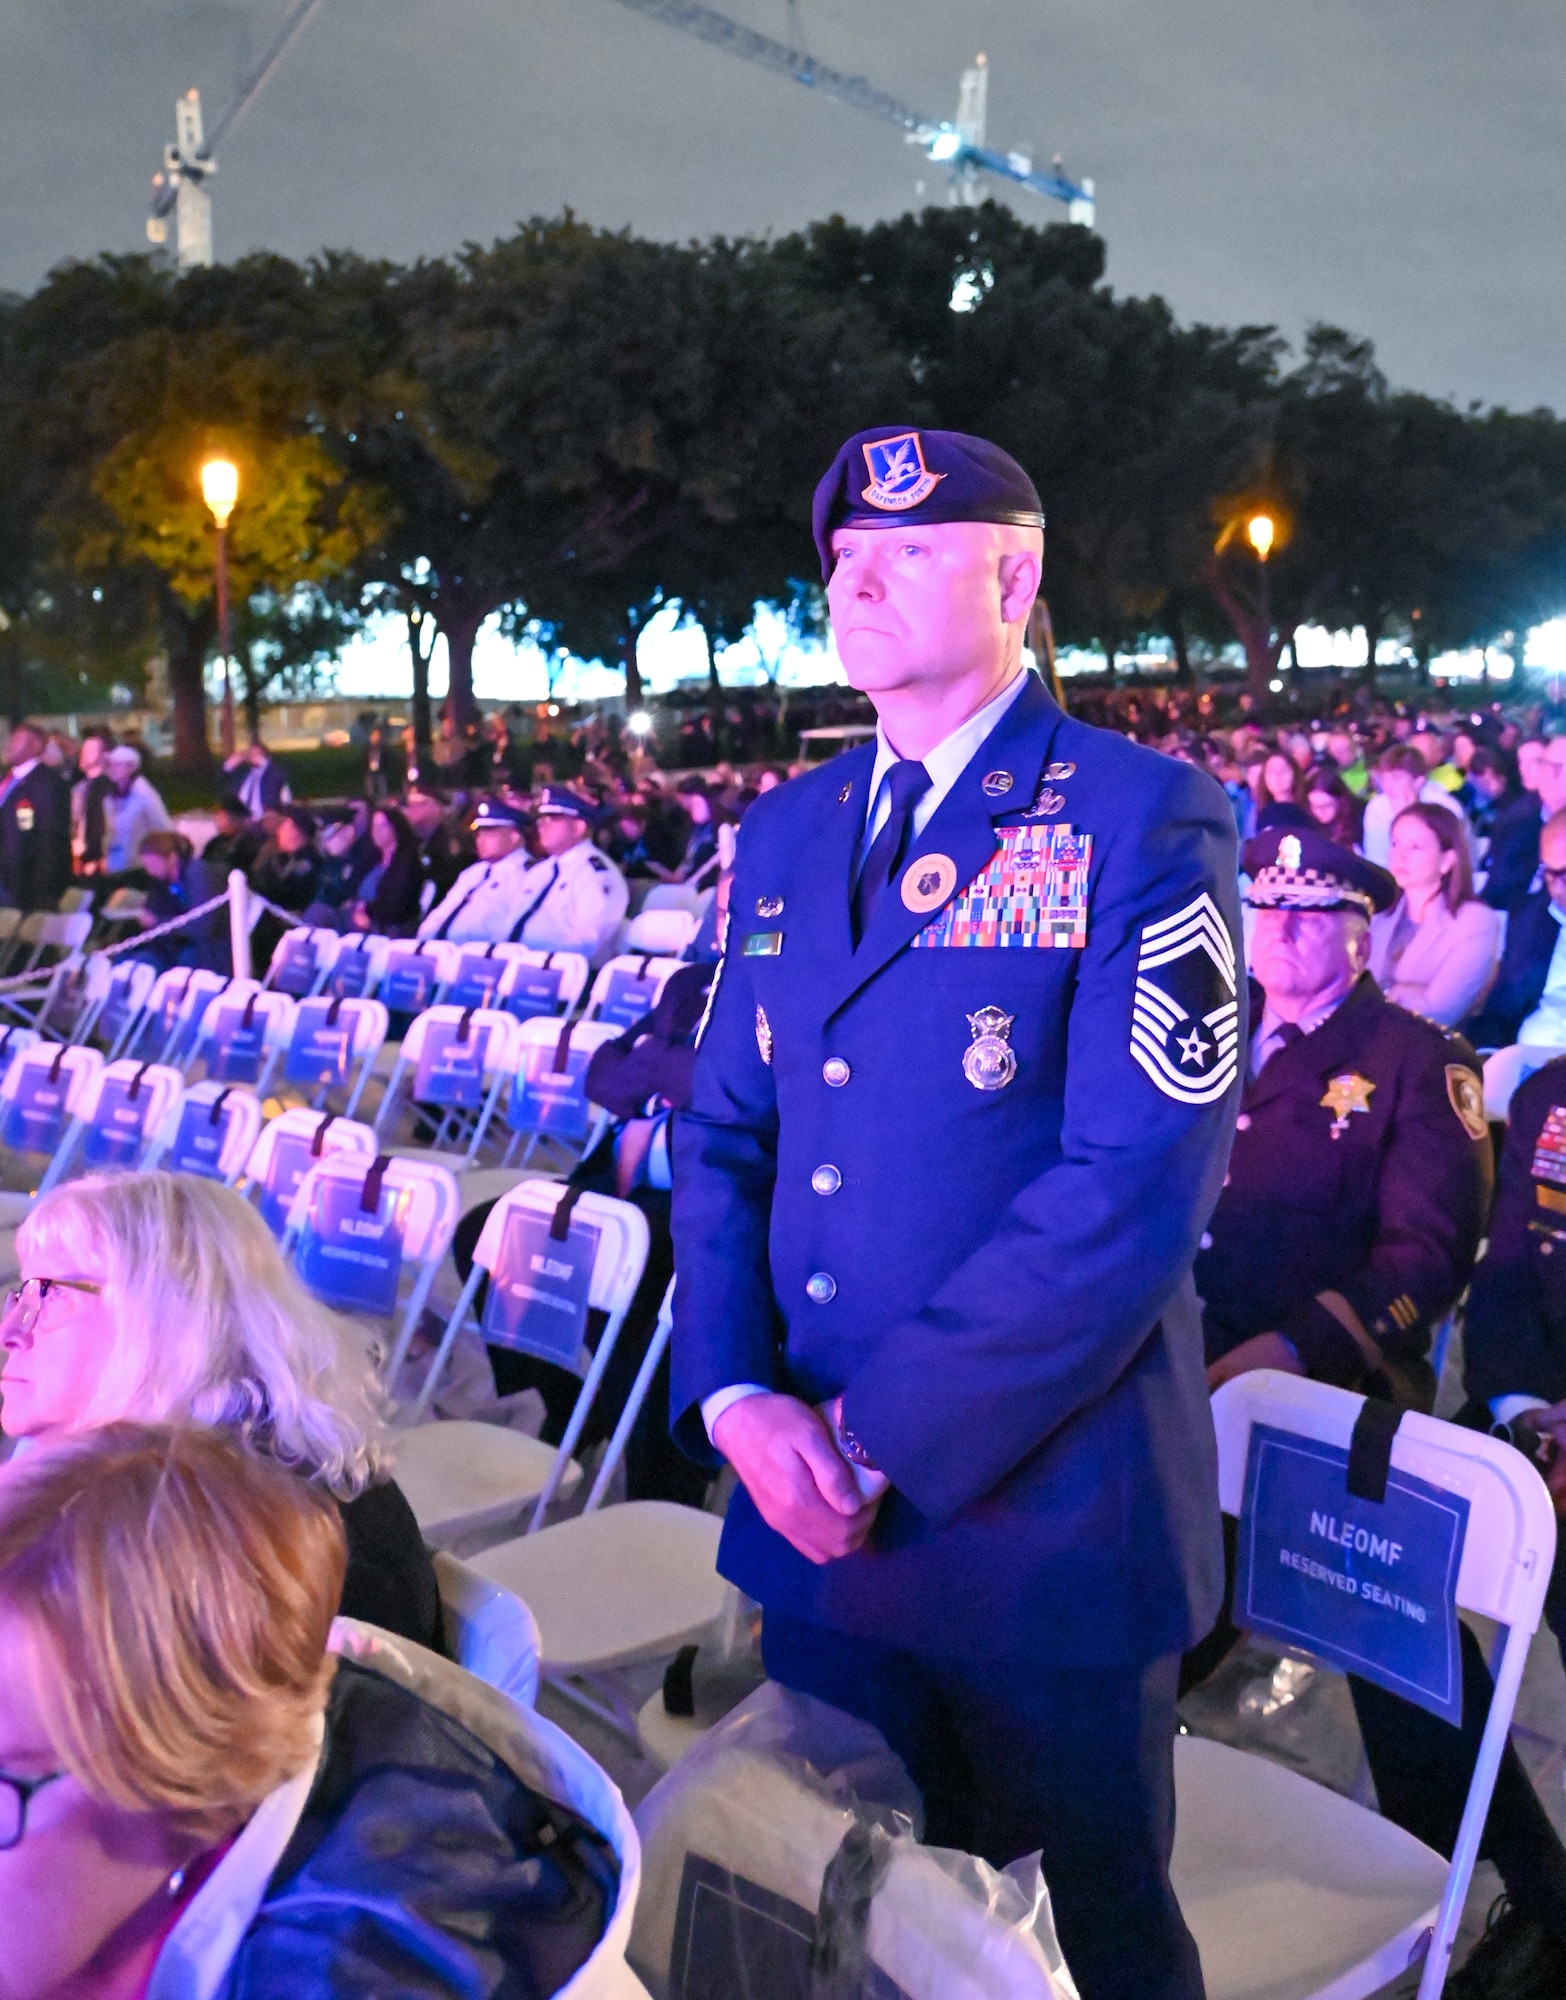 An Air Force chief master sergeant stands to pay tribute to Air Force security forces members whose names were read during a roll call at the 35th annual candlelight vigil at the National Mall in Washington, D.C. May 13, 2023. The vigil recognized law enforcement officers killed in the line of duty whose names were dedicated on the U.S. National Law Enforcement Memorial in Washington, D.C. Five hundred and fifty-six names were read aloud in front of a crowd of thousands. (U.S. Air Force photo by Abigail Meyer)